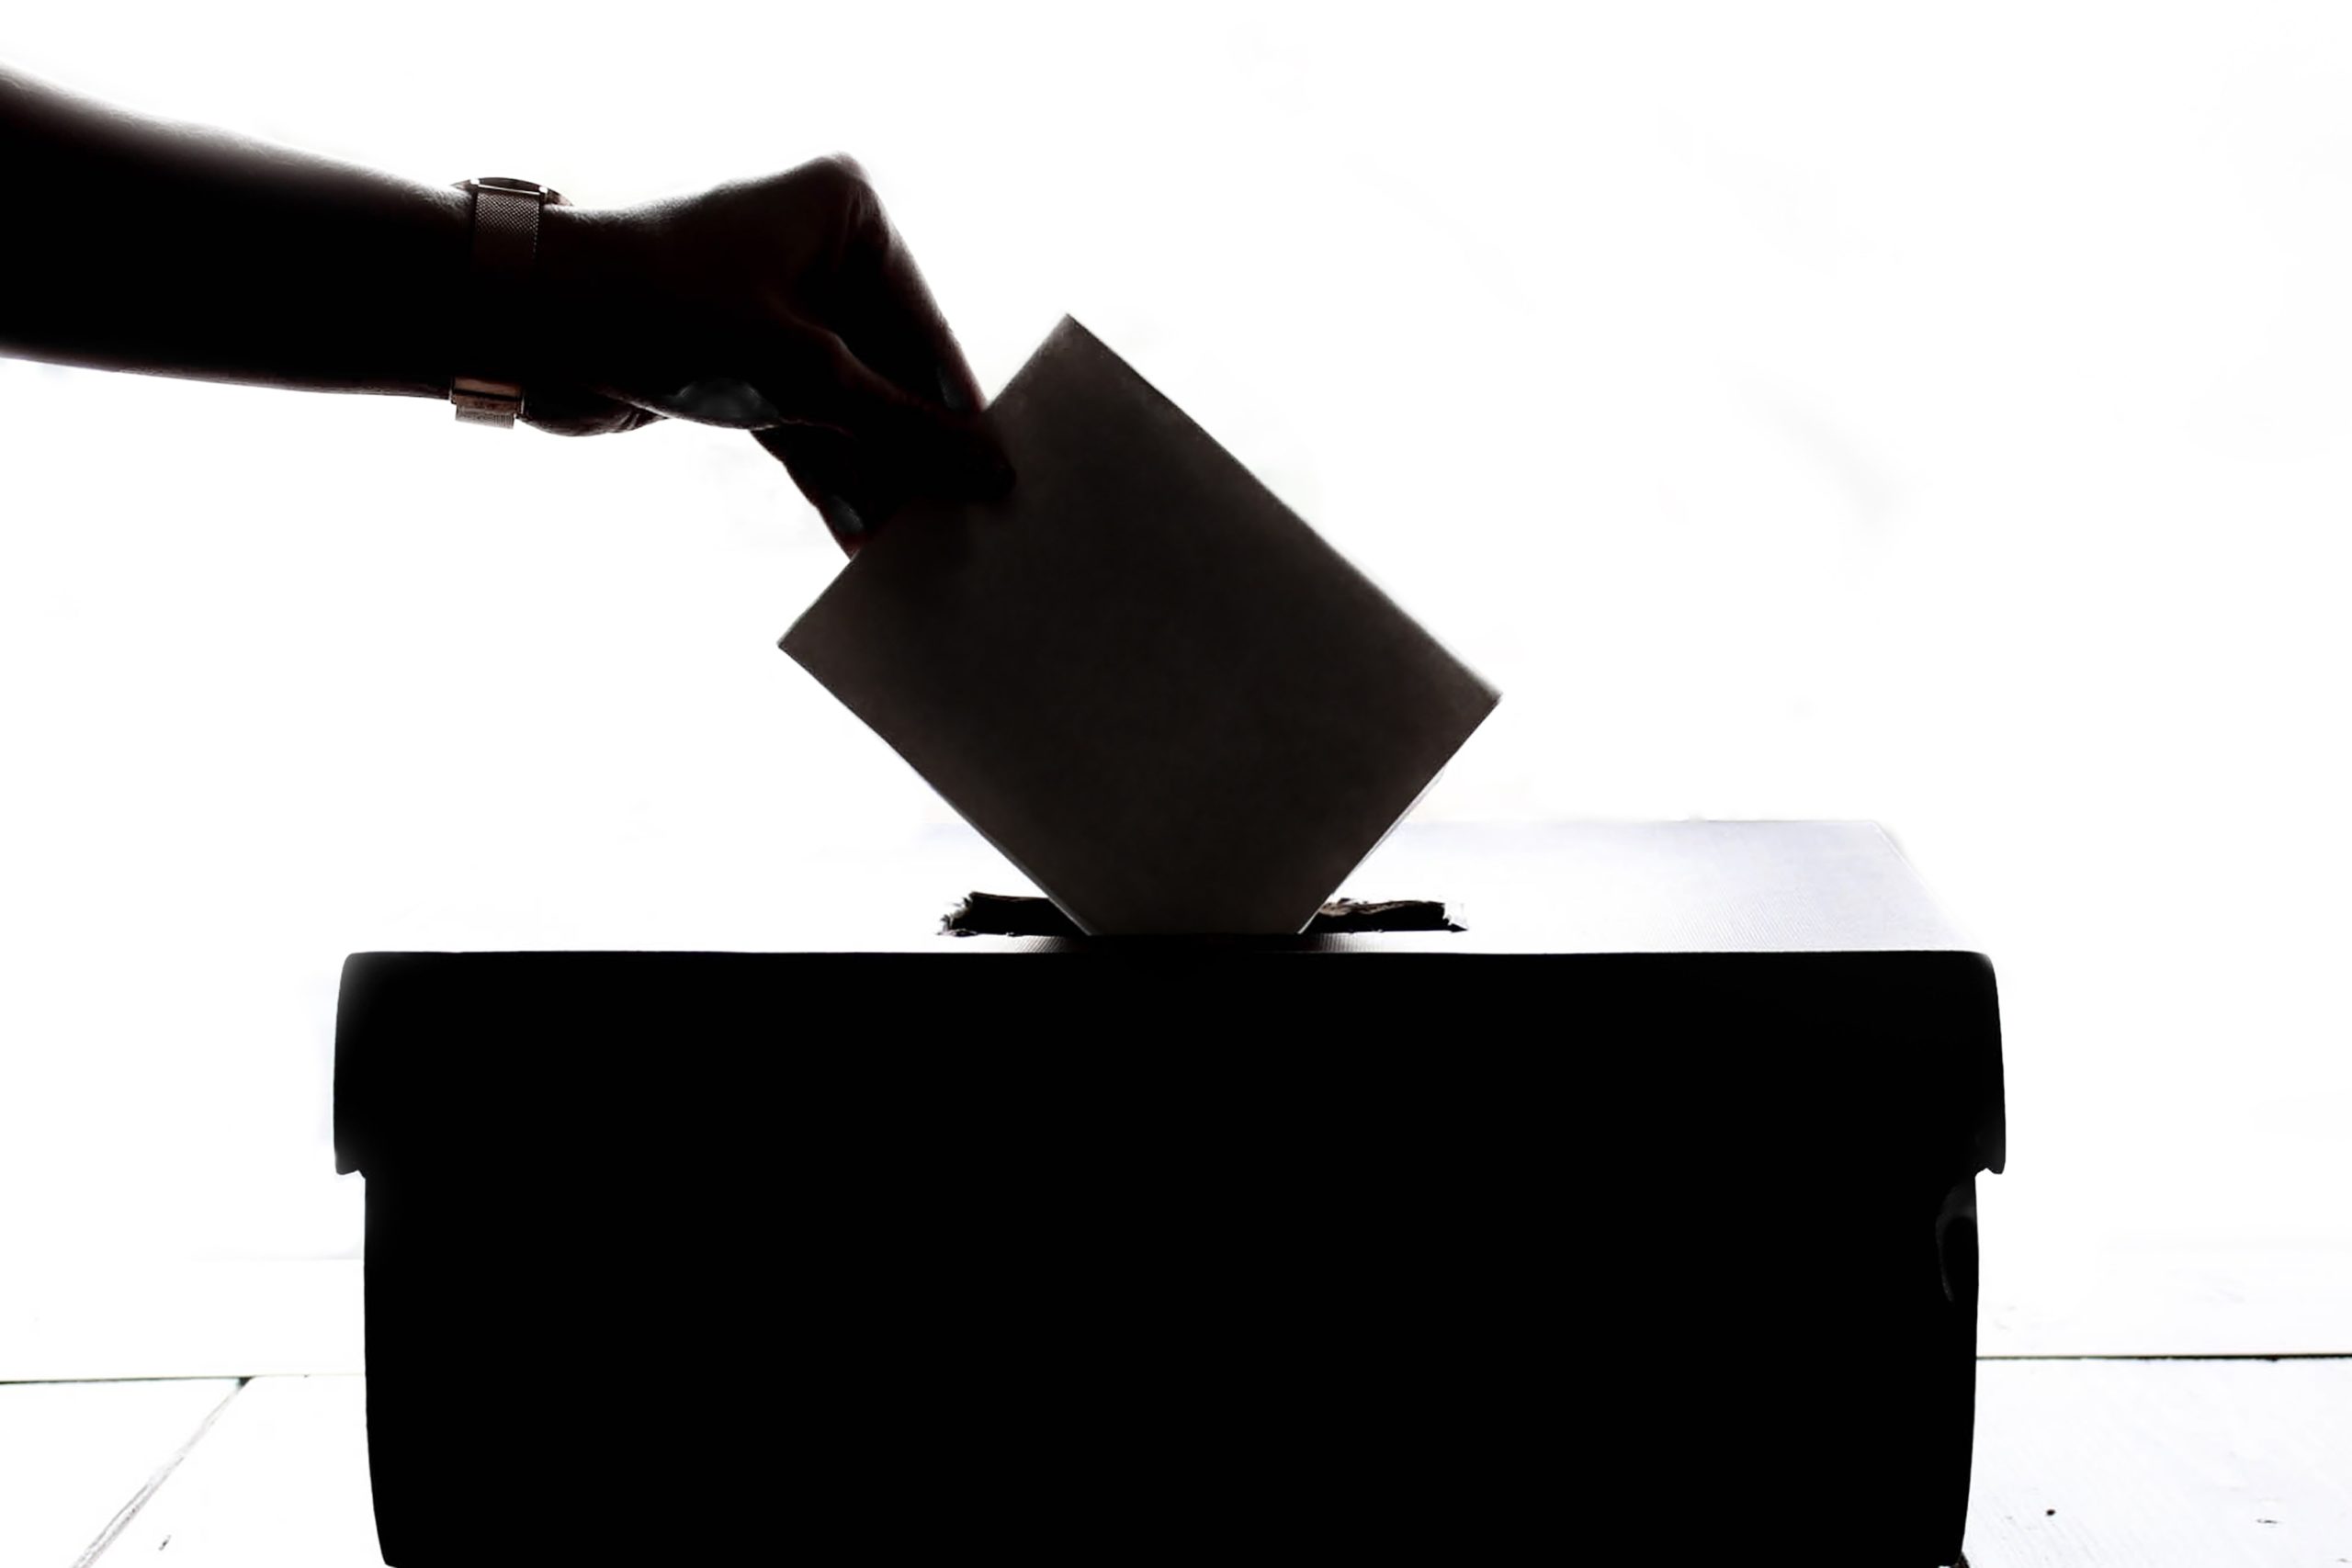 Black and white silhouette of a hand putting a vote in a ballot box.